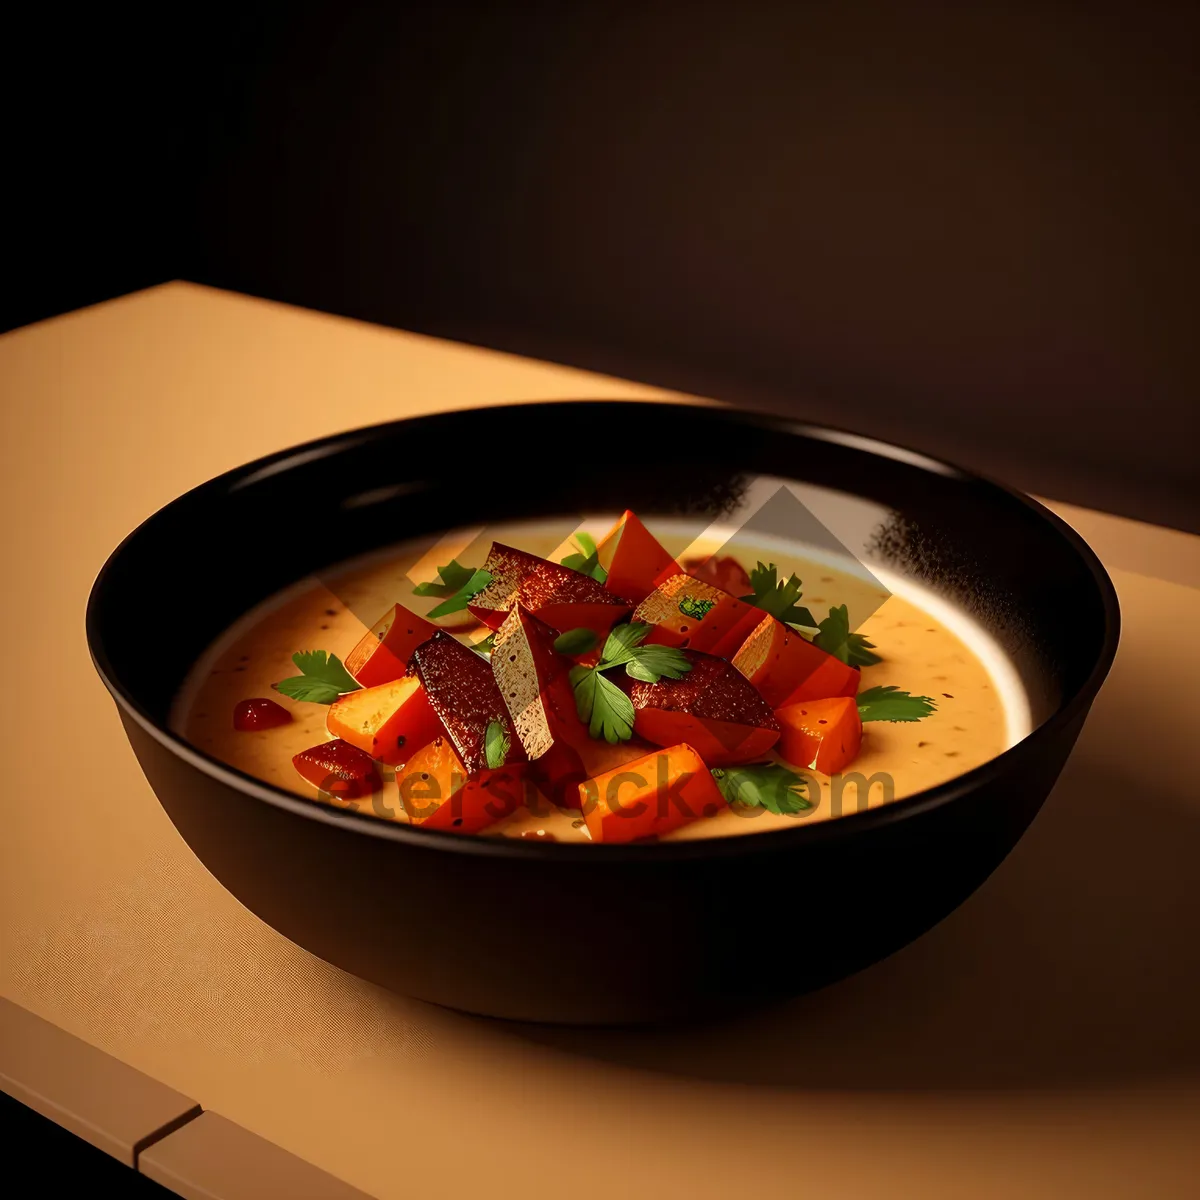 Picture of Delicious Tomato Soup with Fresh Vegetables and Grilled Meat